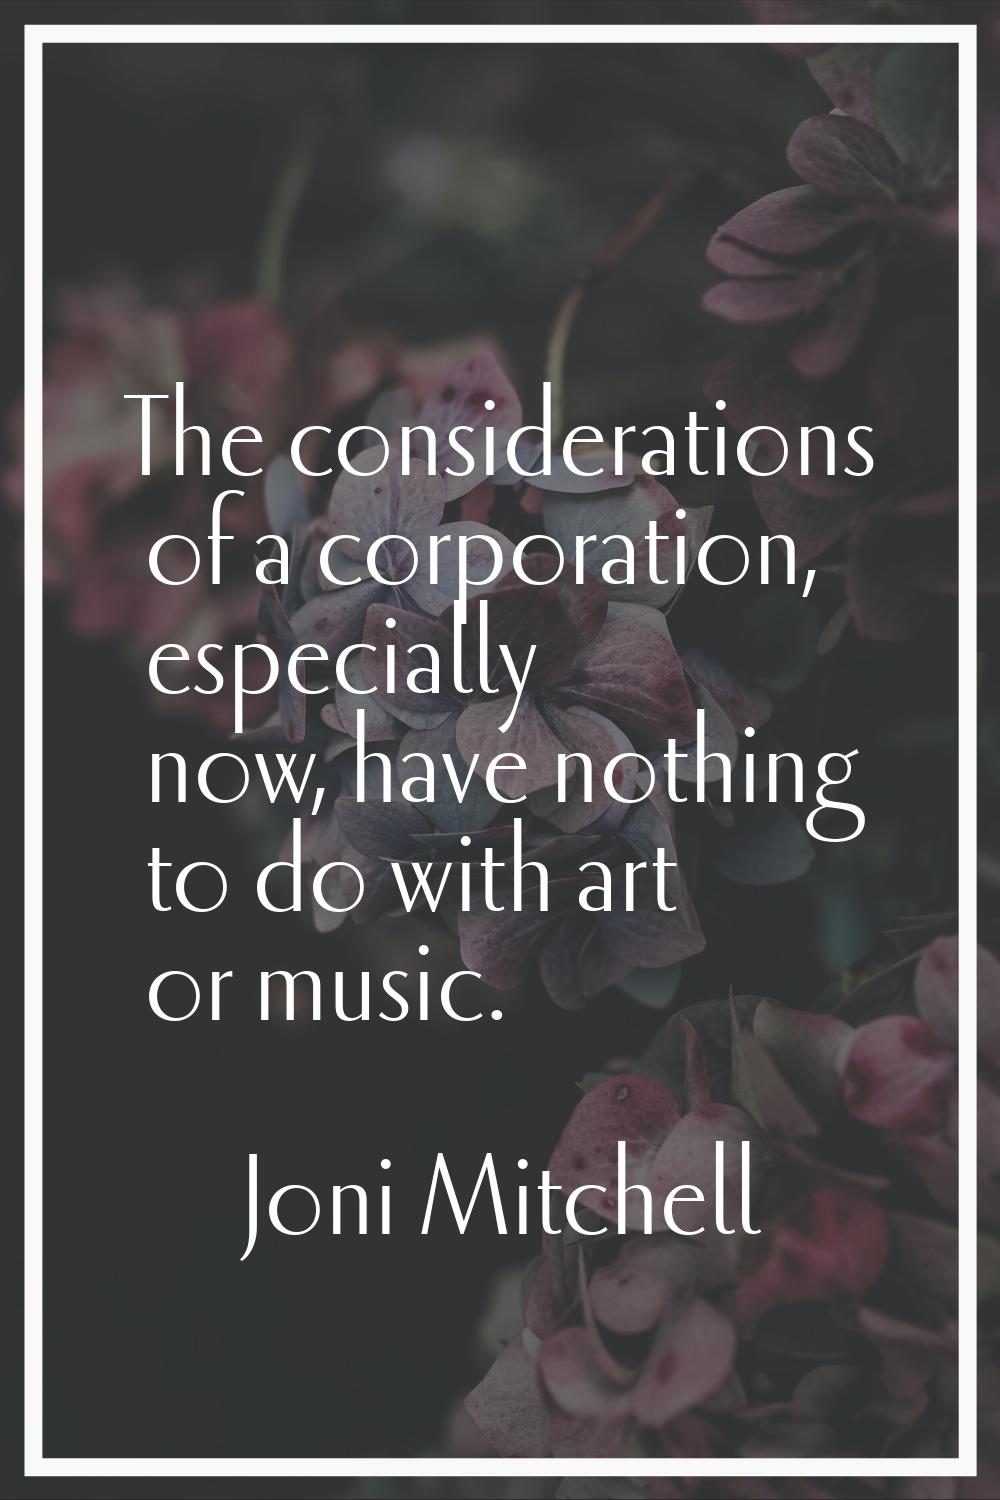 The considerations of a corporation, especially now, have nothing to do with art or music.